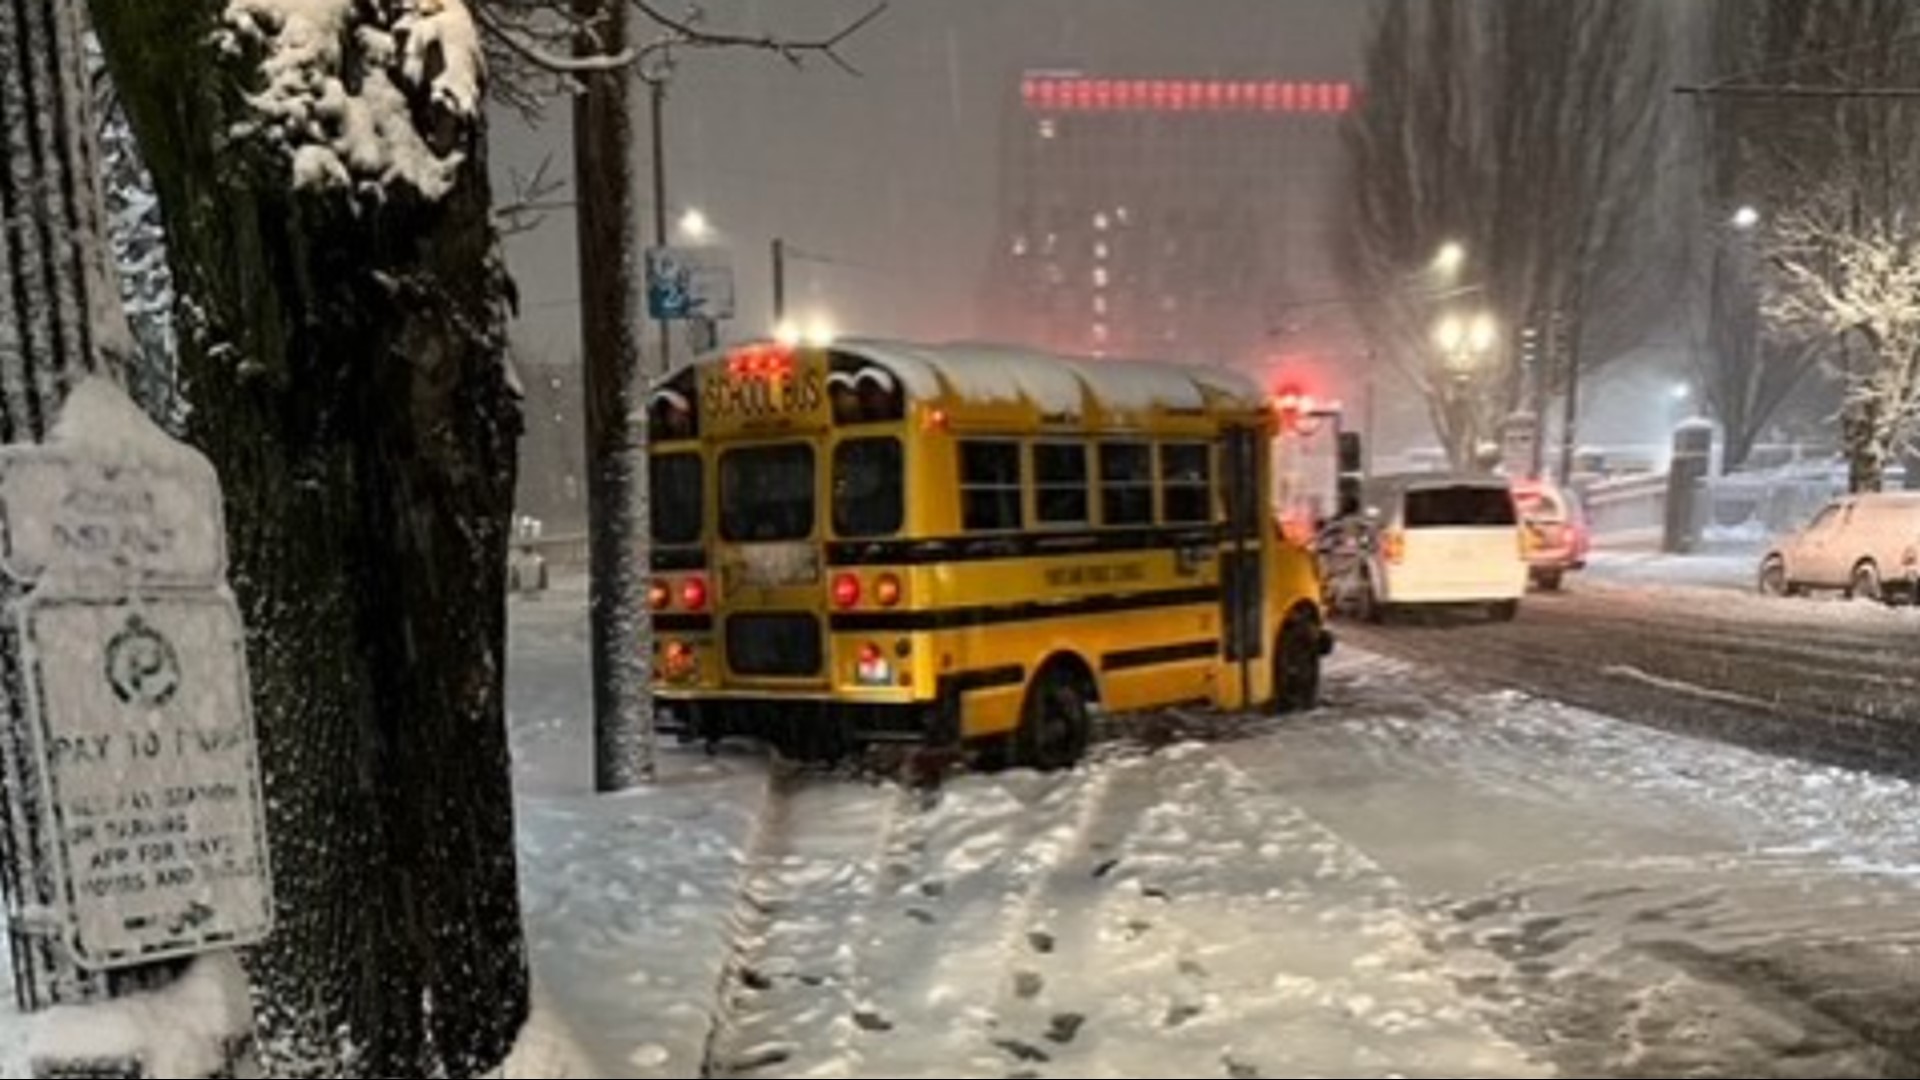 The eight students were from Roseway Heights Middle School. A second PPS bus driver said she got stuck in the snow after dropping off the last of her students.